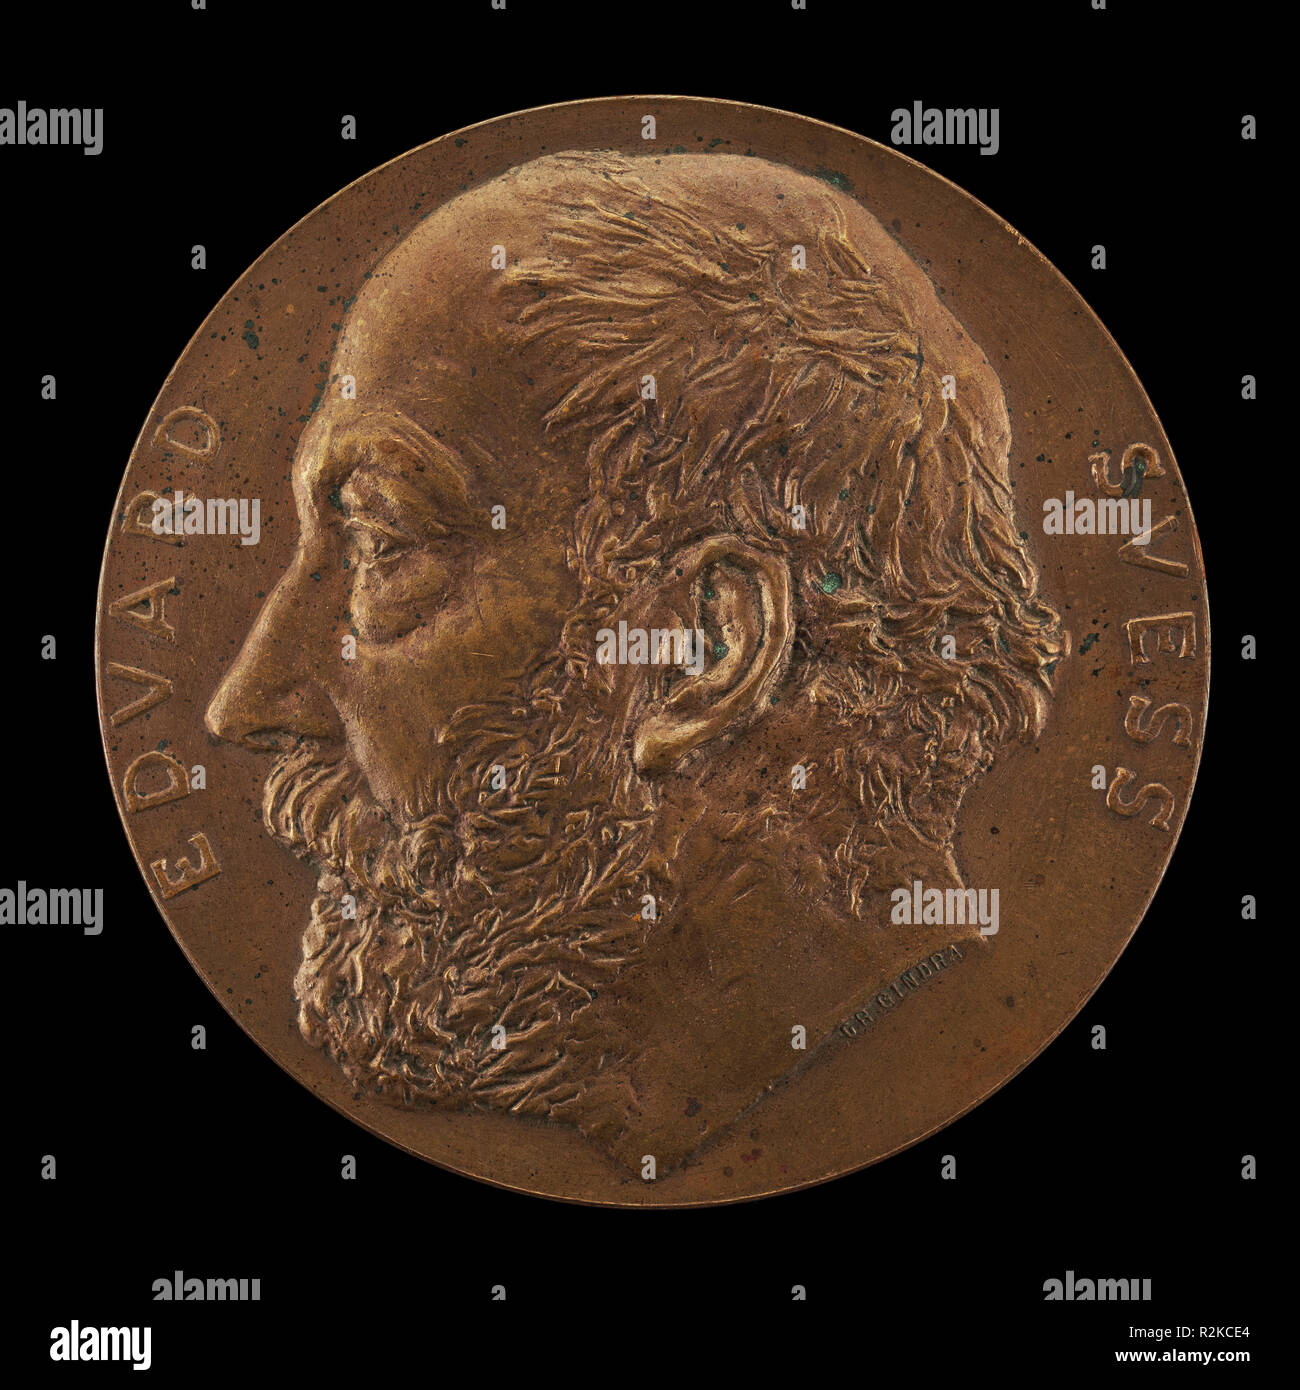 Eduard Suess, 1831-1914, Geologist [obverse]. Dated: 1897. Dimensions: overall (diameter): 7.49 cm (2 15/16 in.)  gross weight: 157.69 gr (0.348 lb.)  axis: 12:00. Medium: bronze. Museum: National Gallery of Art, Washington DC. Author: Karl Gindra. Stock Photo